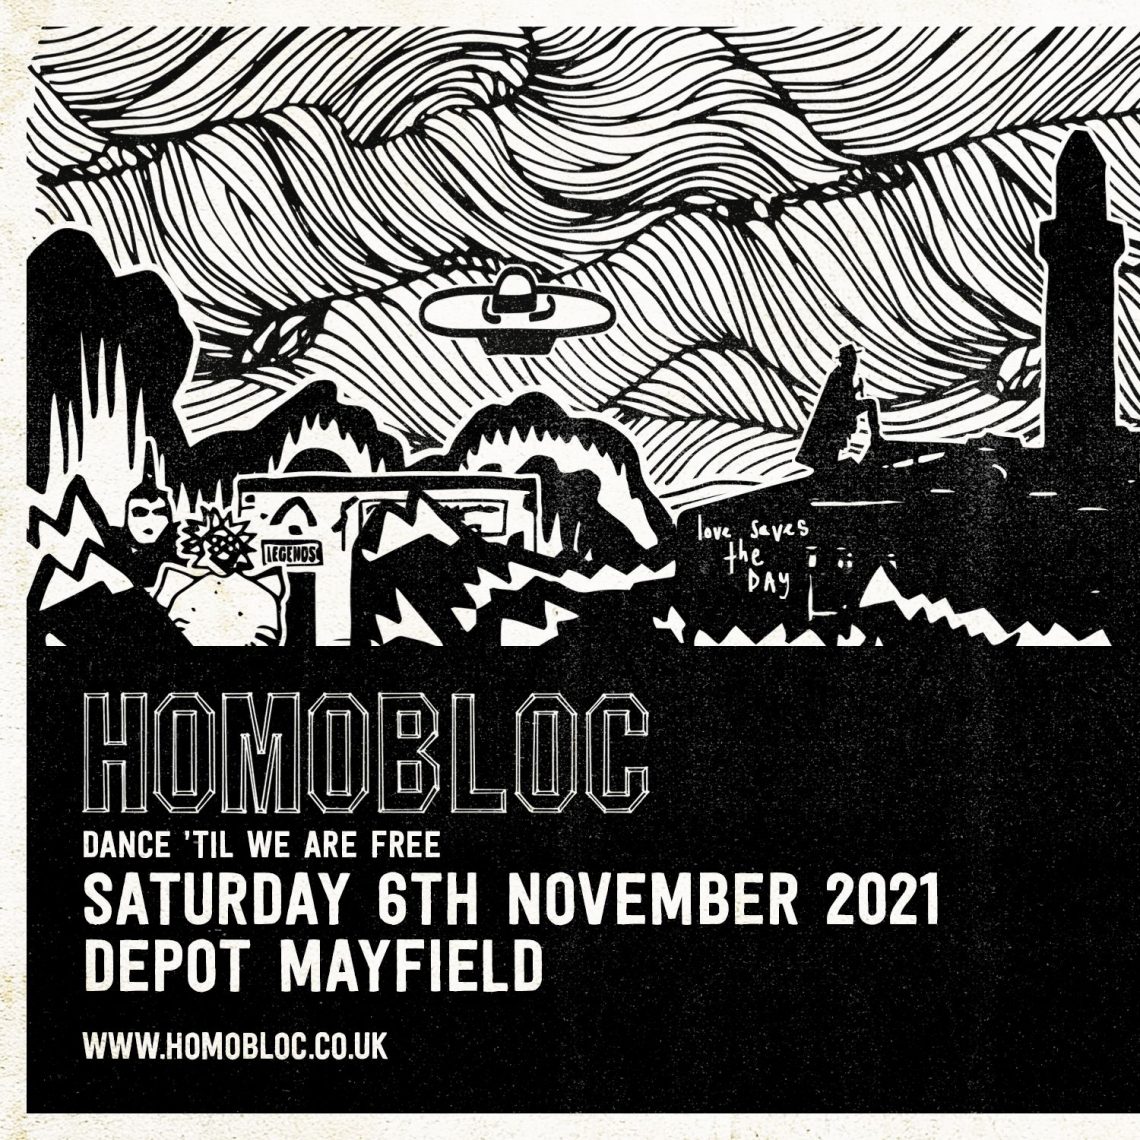 A poster for queer clubbing event, Homobloc, with an artist's impression of Manchester's industrial skyline.